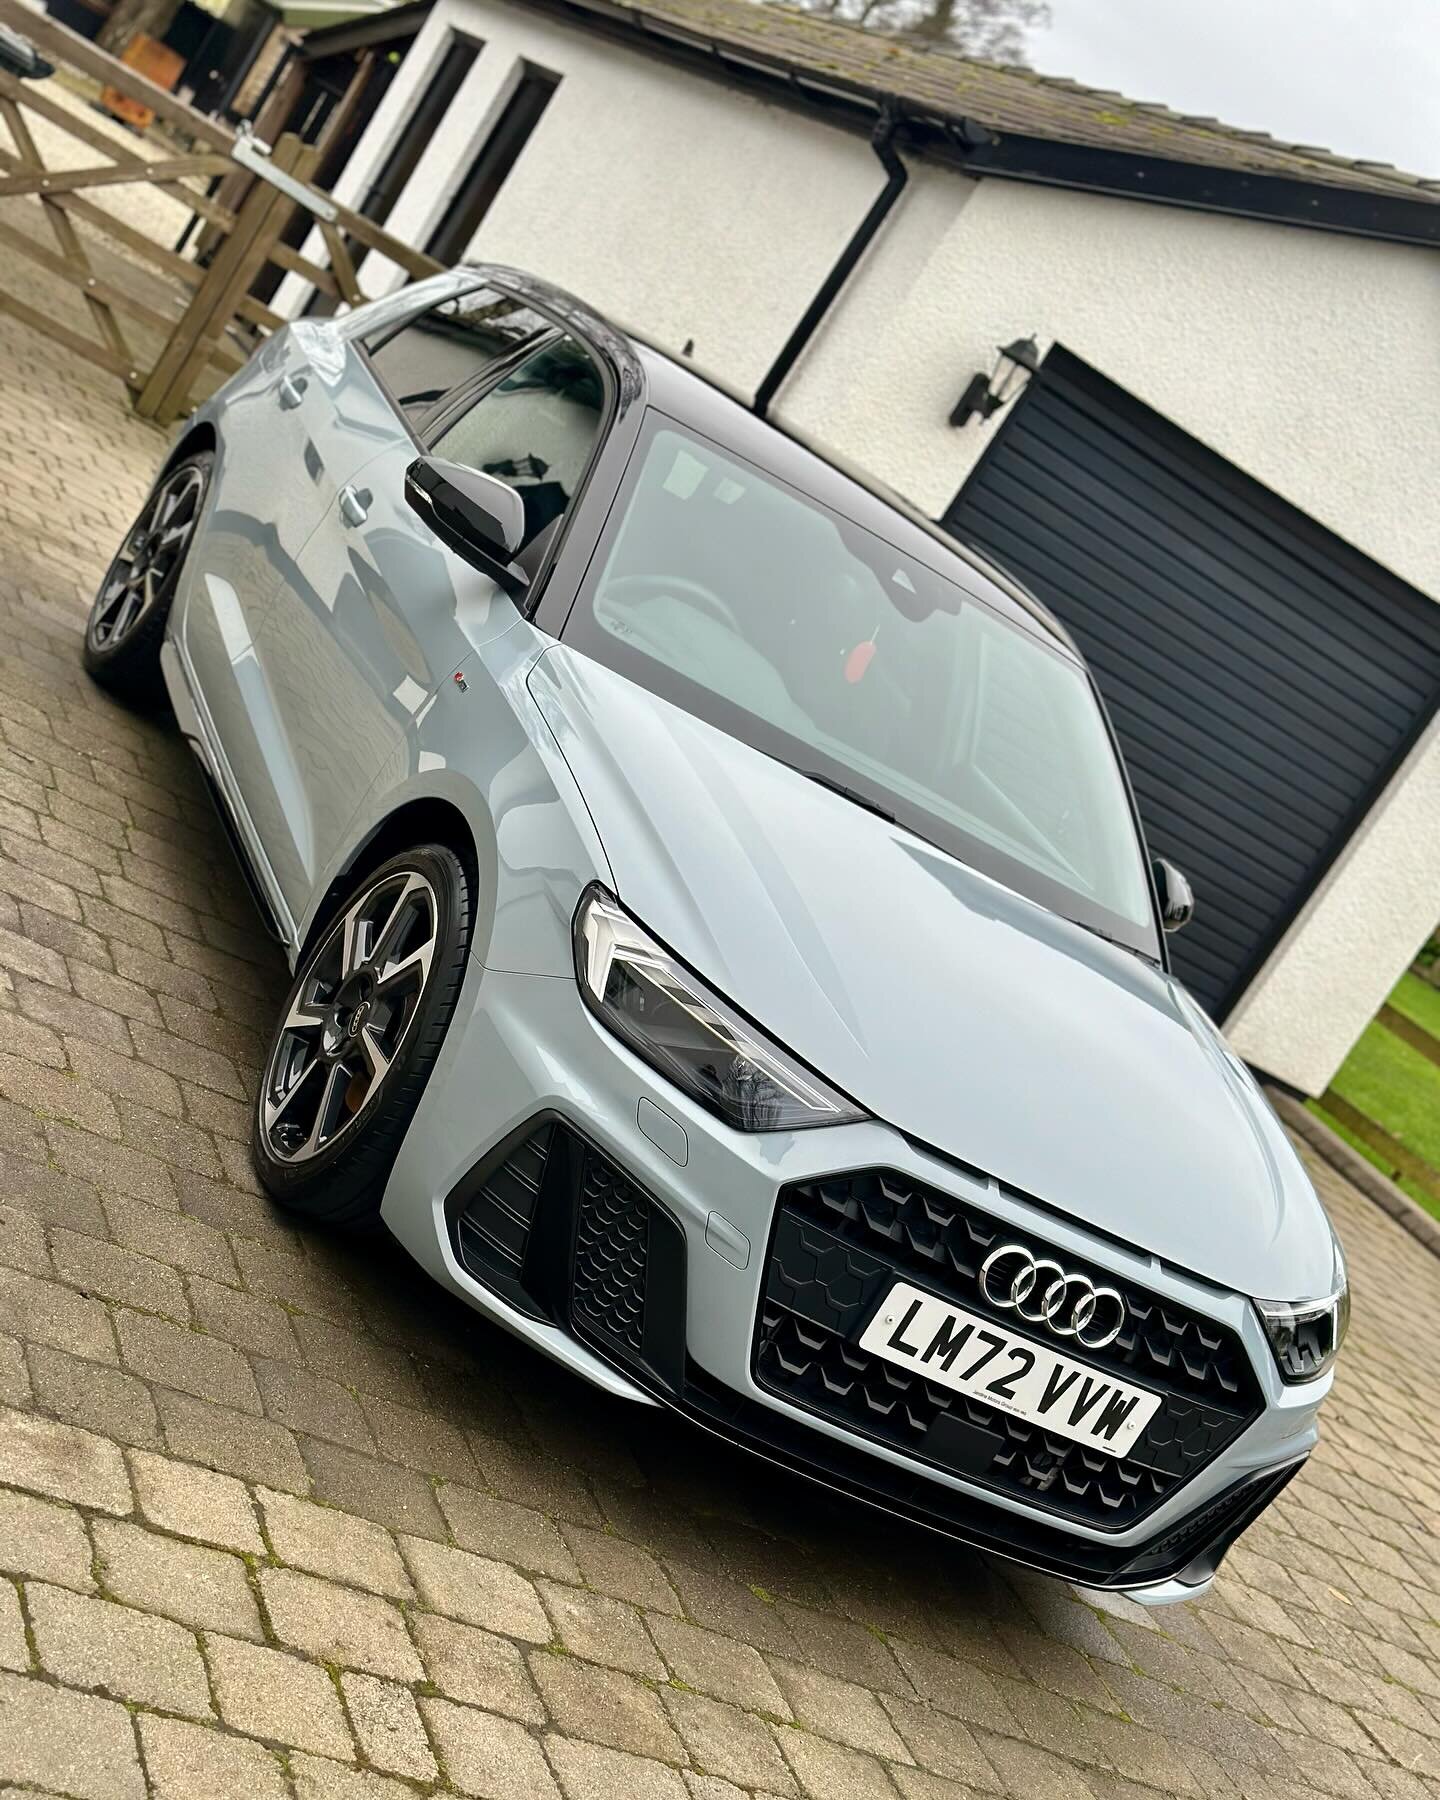 Audi A1 Protected 🛡️#WD 

Today we carried out our ever popular Decon &amp; Protect package. This package is our entry level protection package, enhancing gloss, and leaving your paintwork protected for years to come. 

- Exterior Decontamination
- 